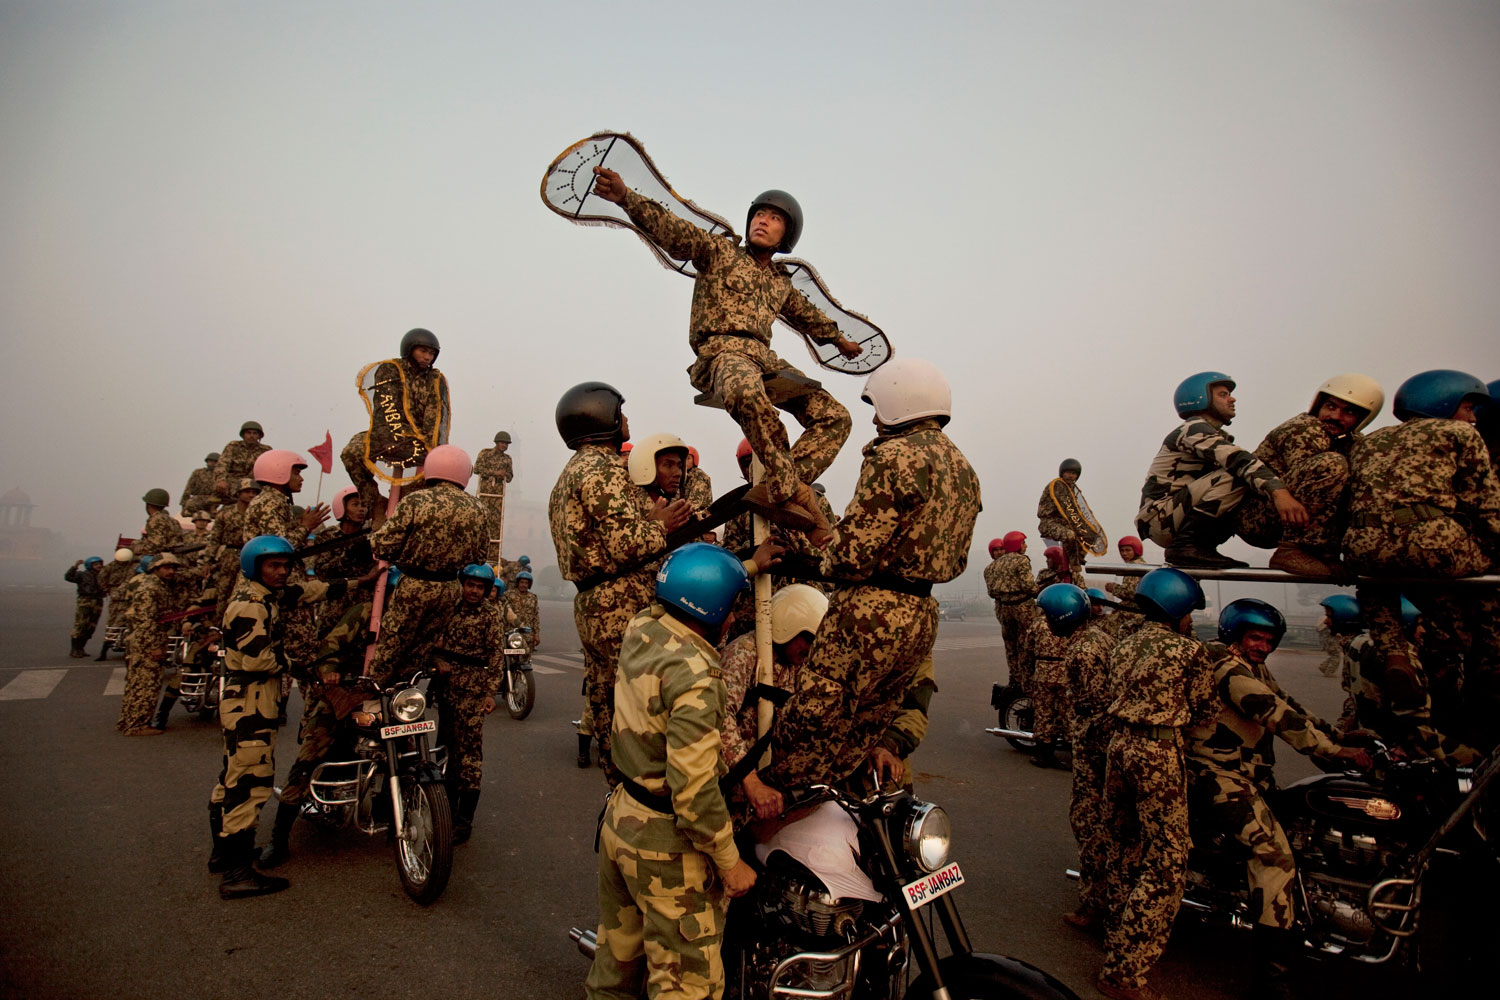 January 12, 2012. Indian soldiers prepare to train on stunt motorcycles in preparation for an upcoming Republic Day parade in New Delhi, India.